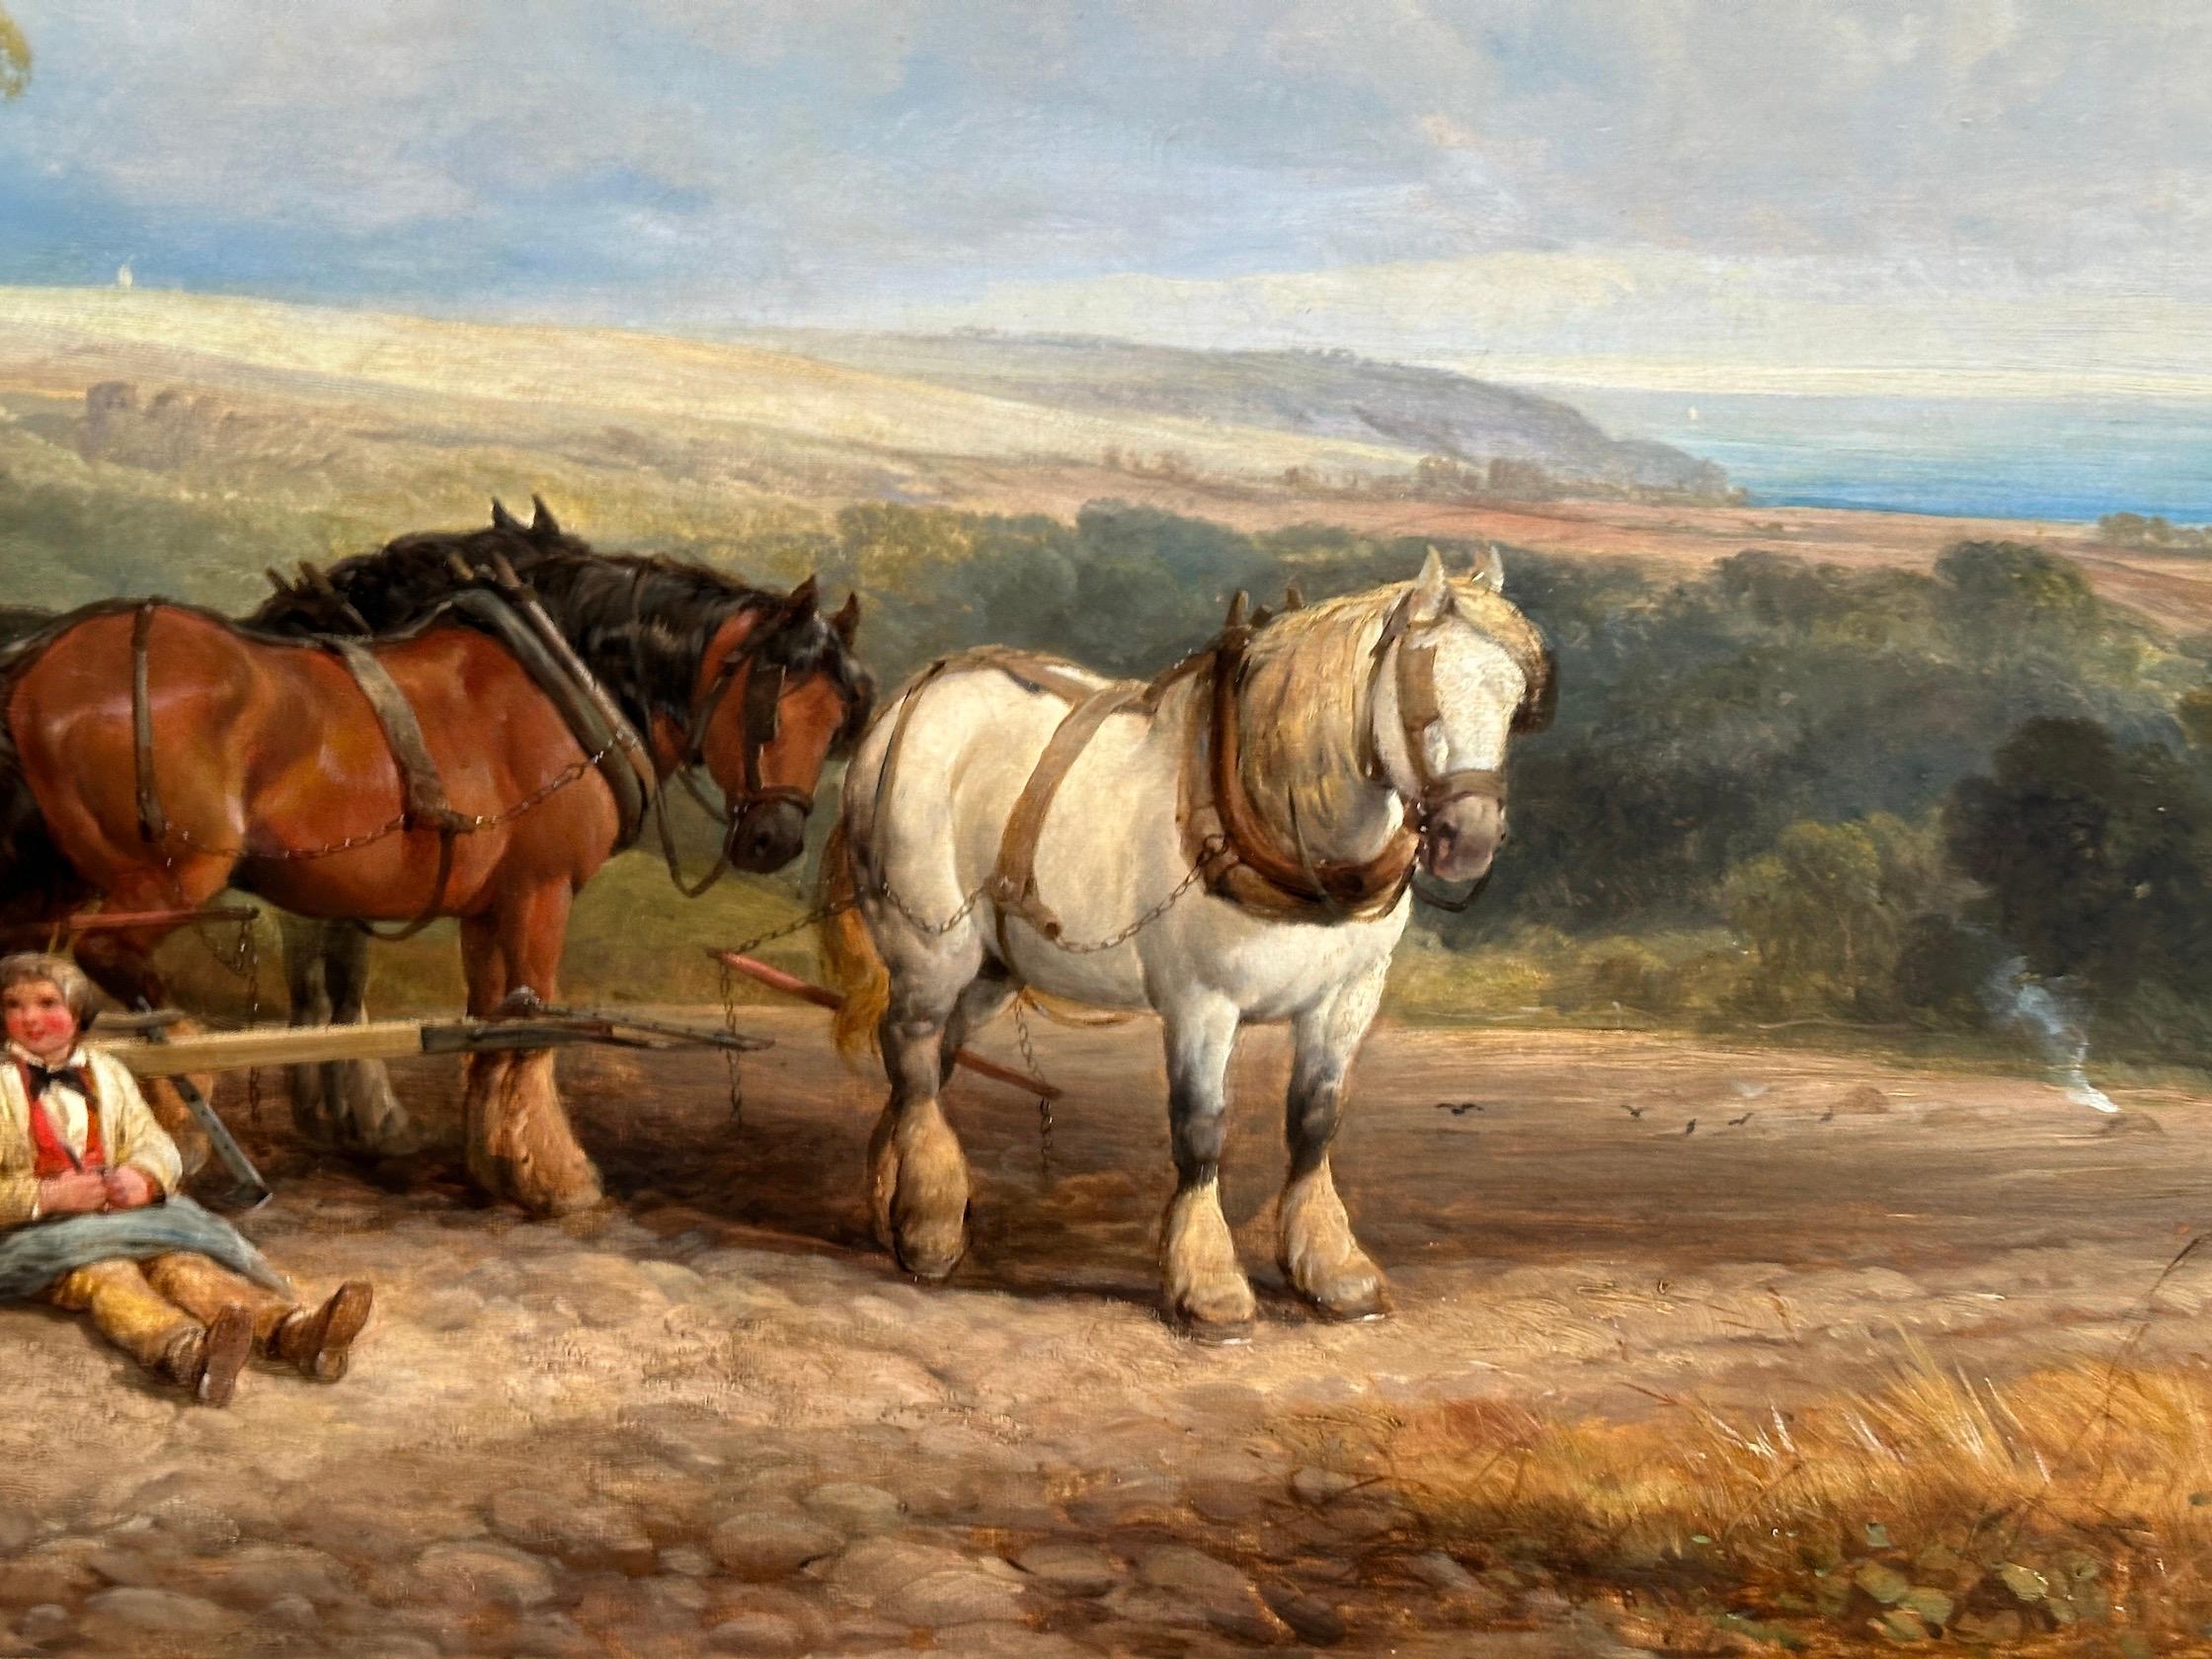 19th century English Harvest landscape with horses, farmers, children, family - Brown Landscape Painting by Henry Brittan Willis